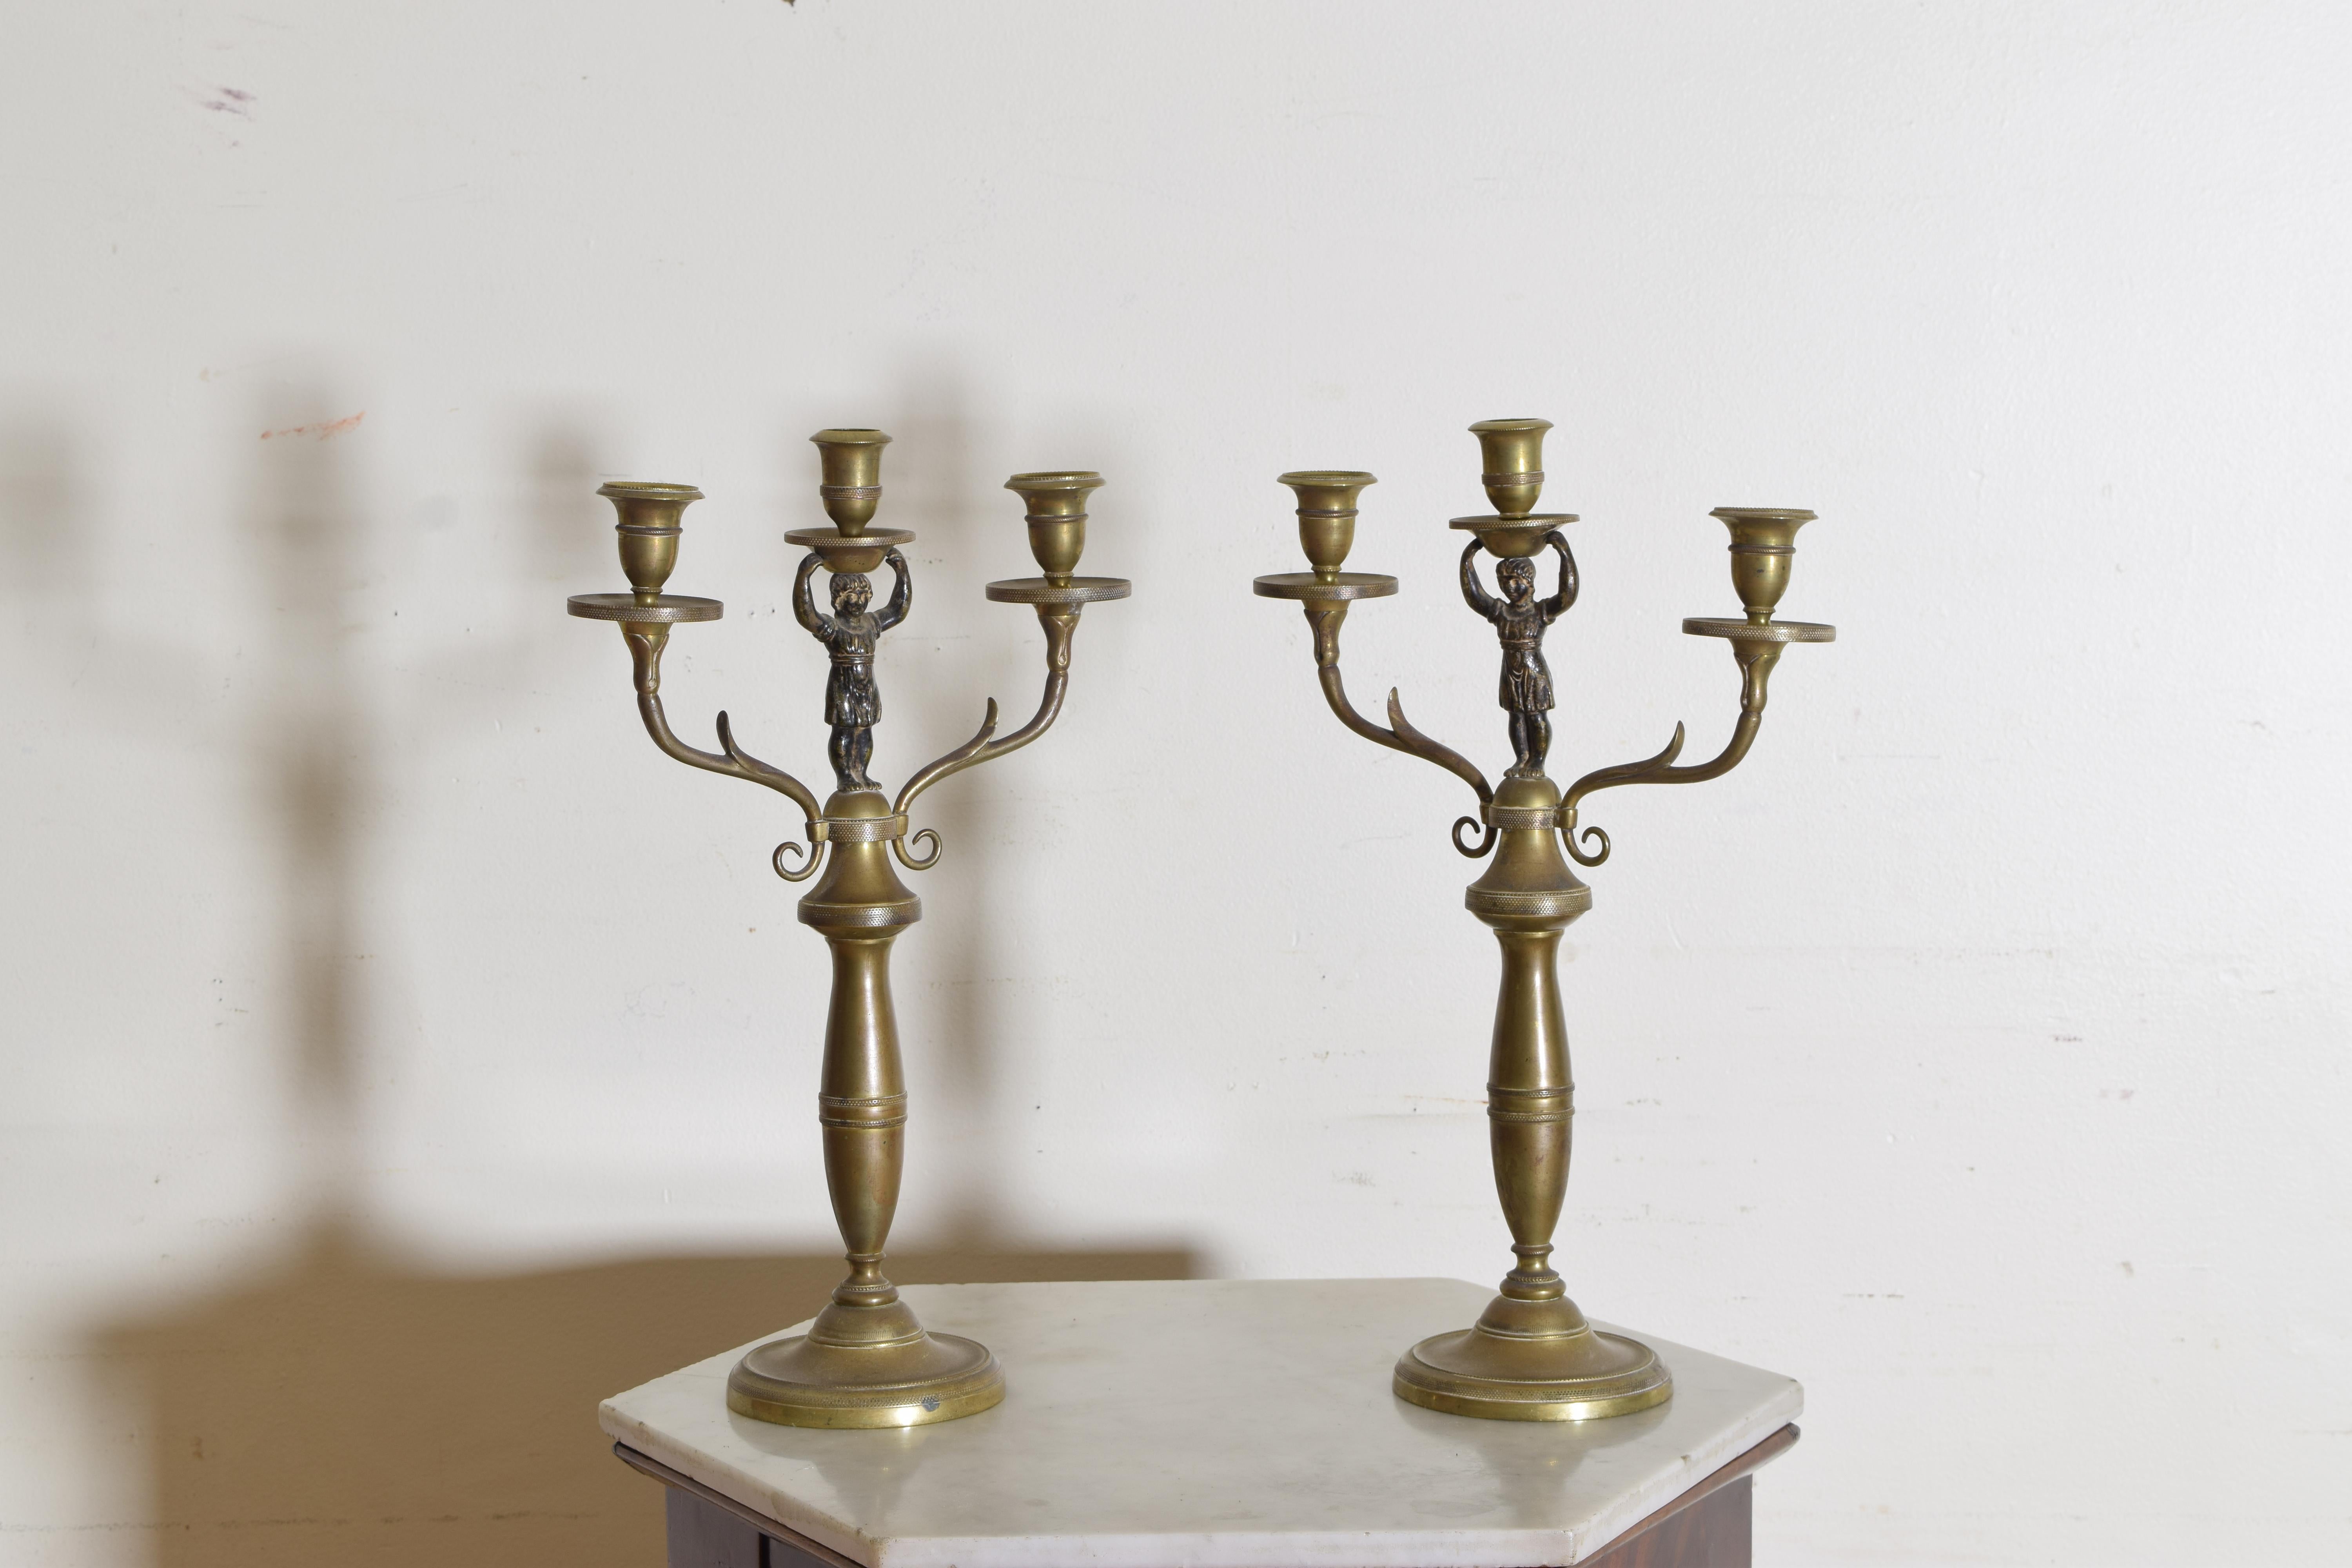 Pair Italian Empire Period Brass 3-Light Figural Candelabras, Early 19th Century In Good Condition For Sale In Atlanta, GA